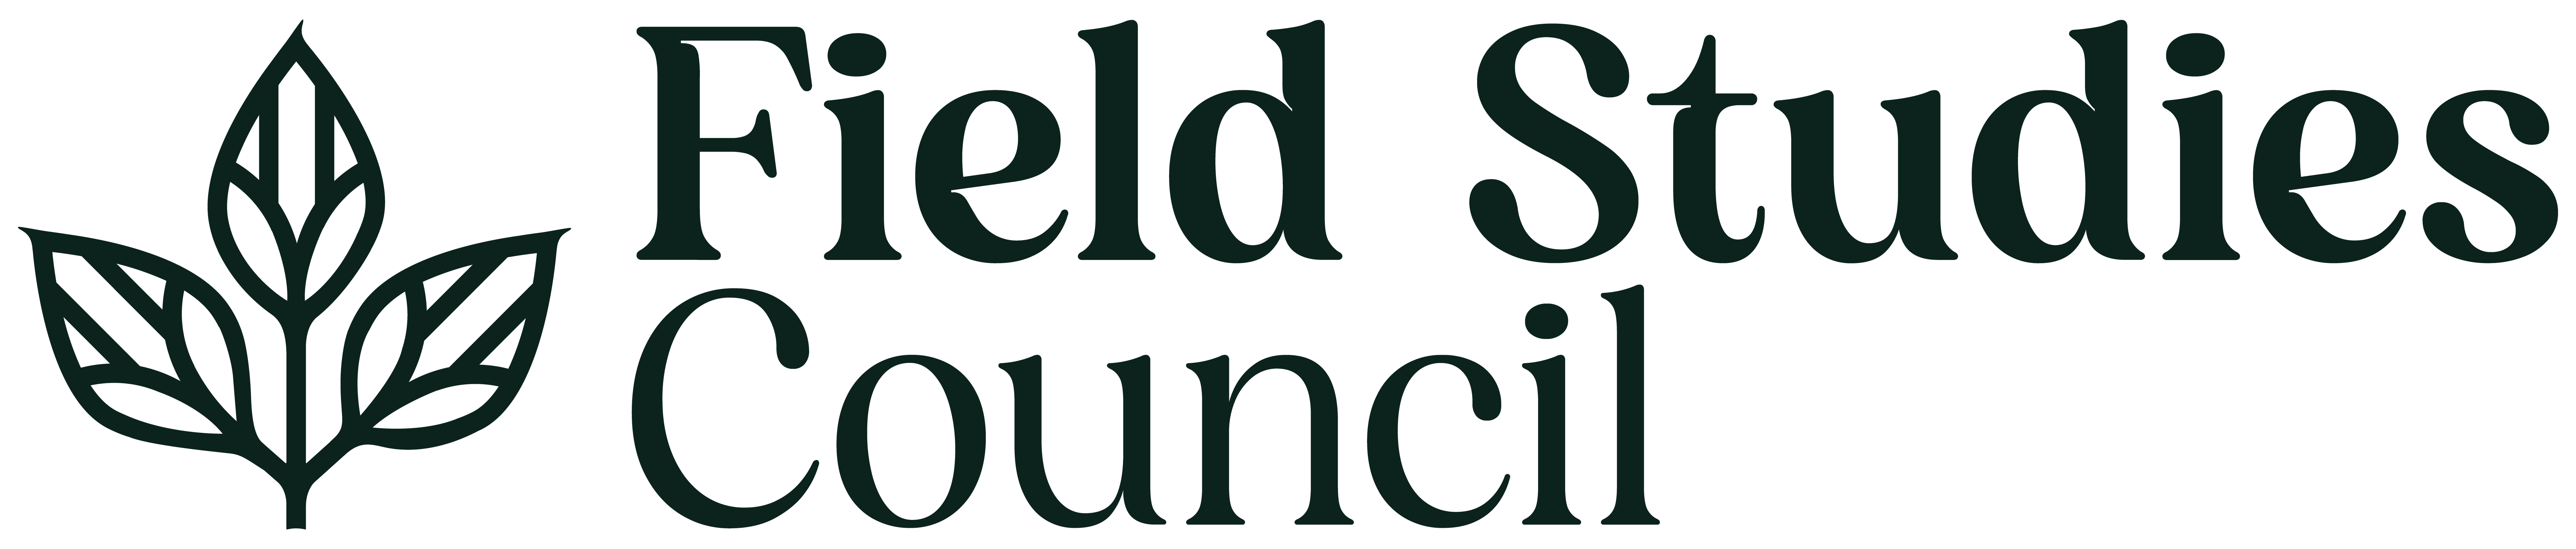 Field Studies Council Logo Together TV